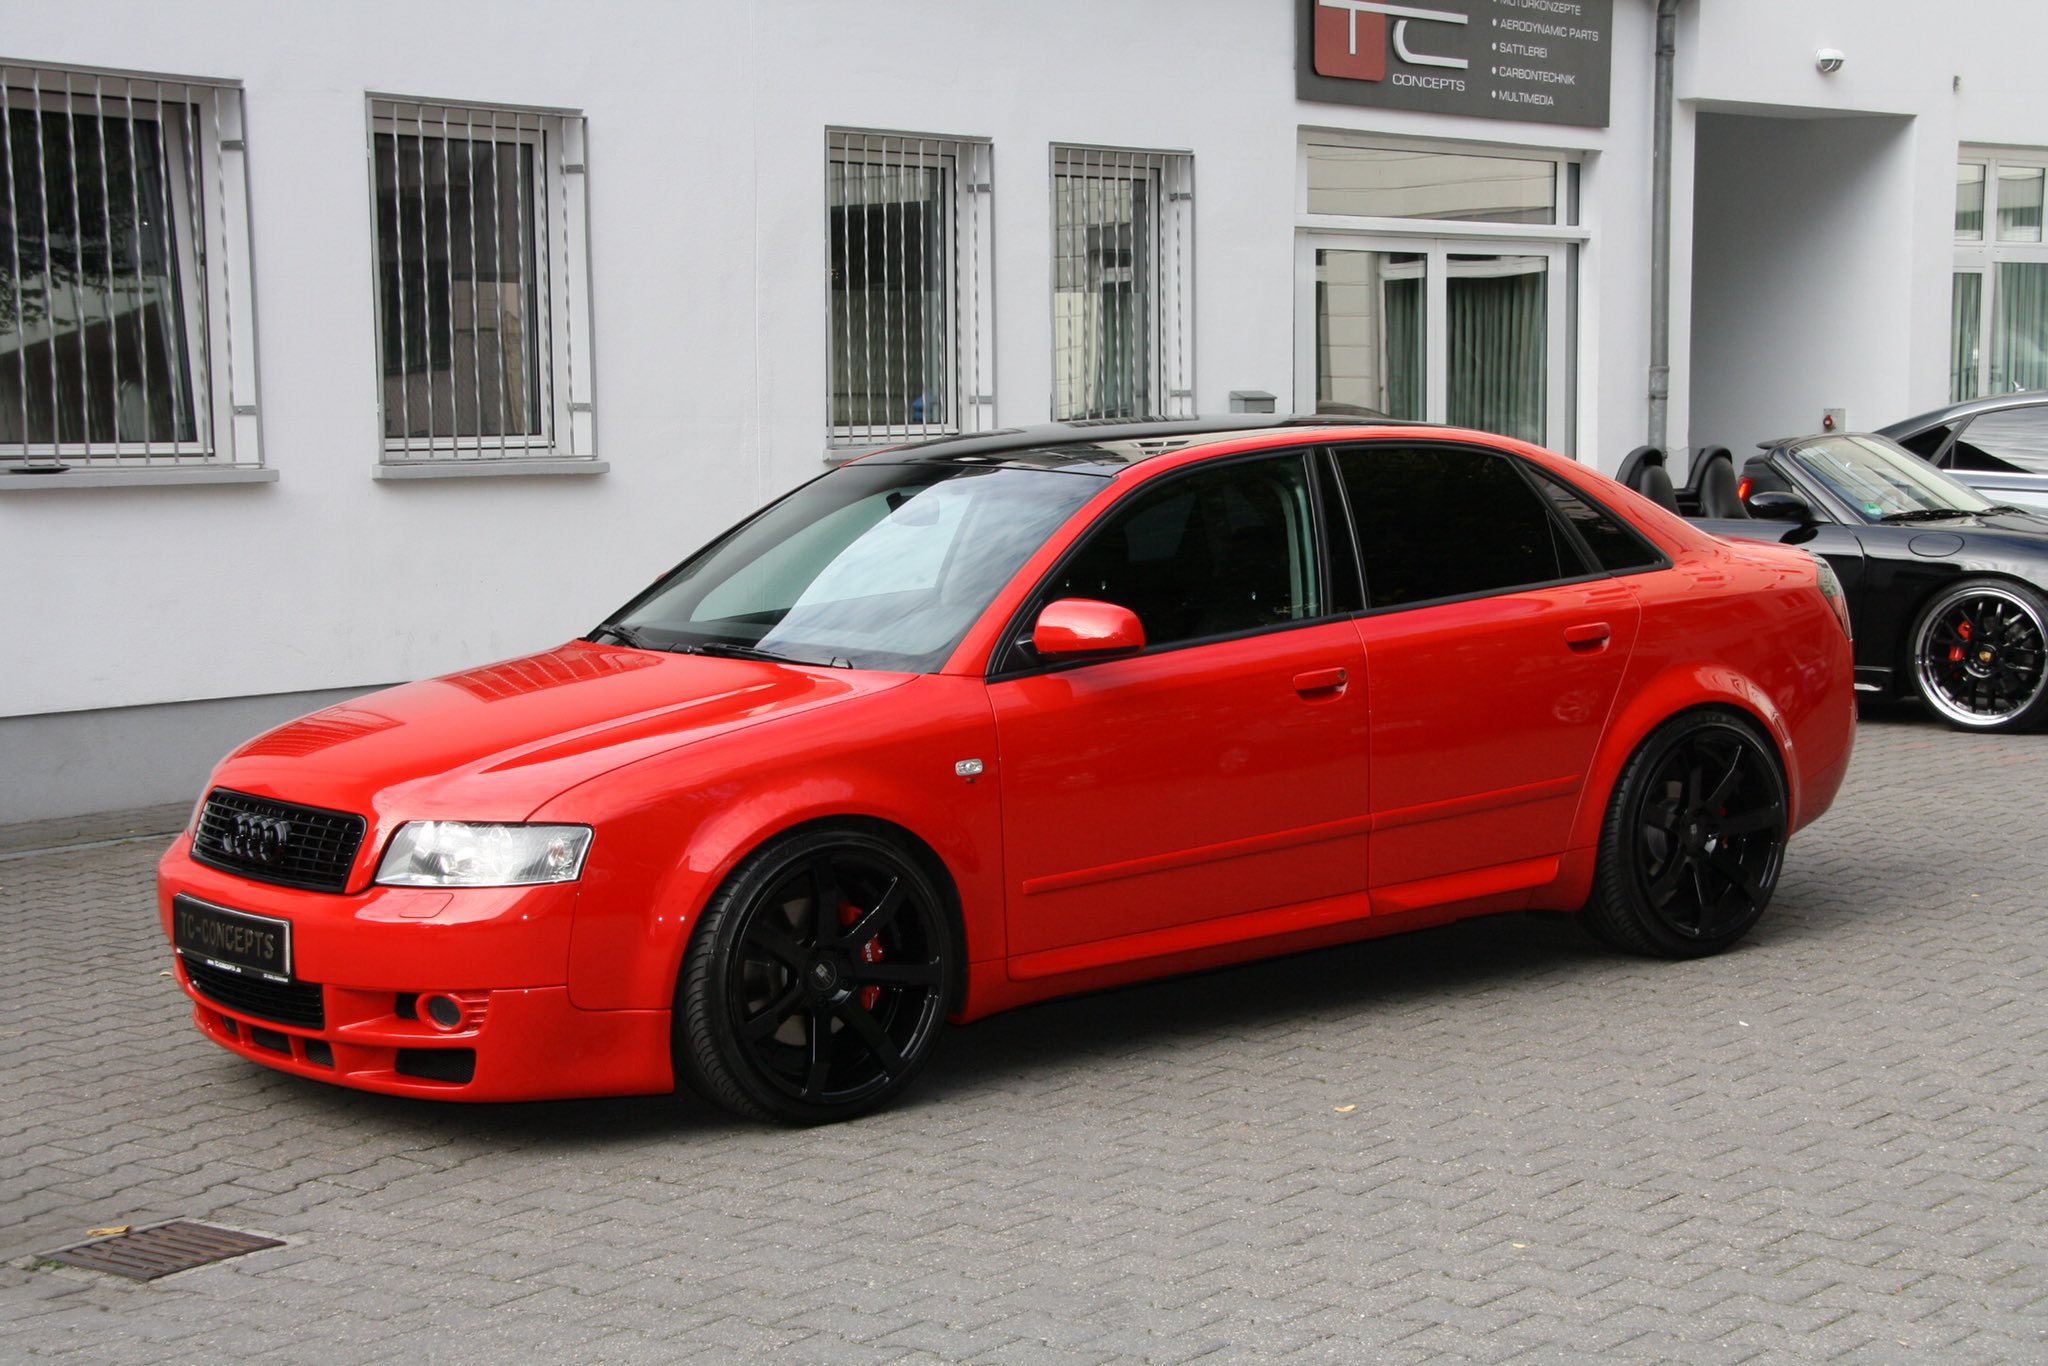 on Twitter: "Good old times The red devil ❤️ • #audia4 #a4b6 #audiv6 #lowering #exhaust #toxiquewheels #quattro https://t.co/4rDUG1LbmY" /